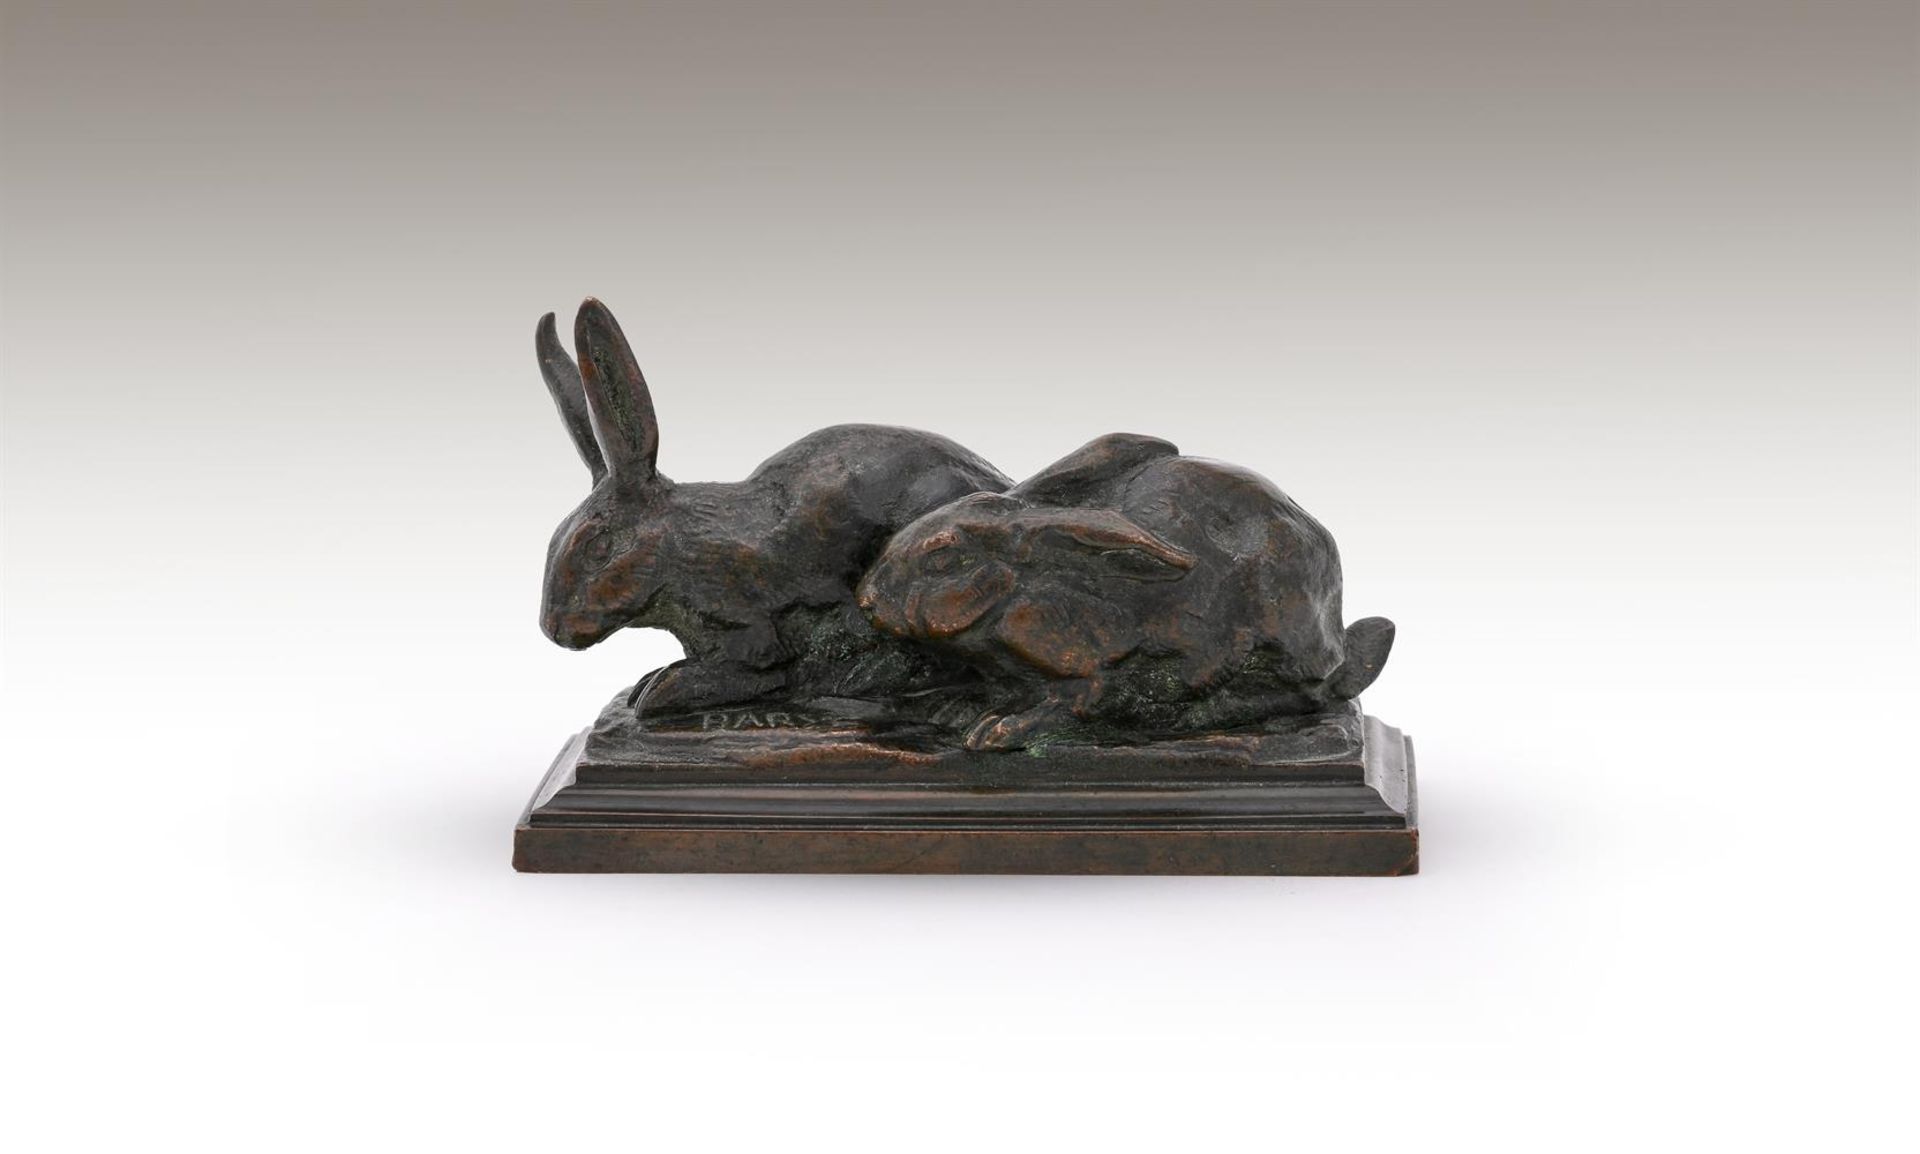 ANTOINE-LOUIS BARYE (FRENCH, 1795-1875), A BRONZE GROUP OF A PAIR OF RABBITS - Image 5 of 5